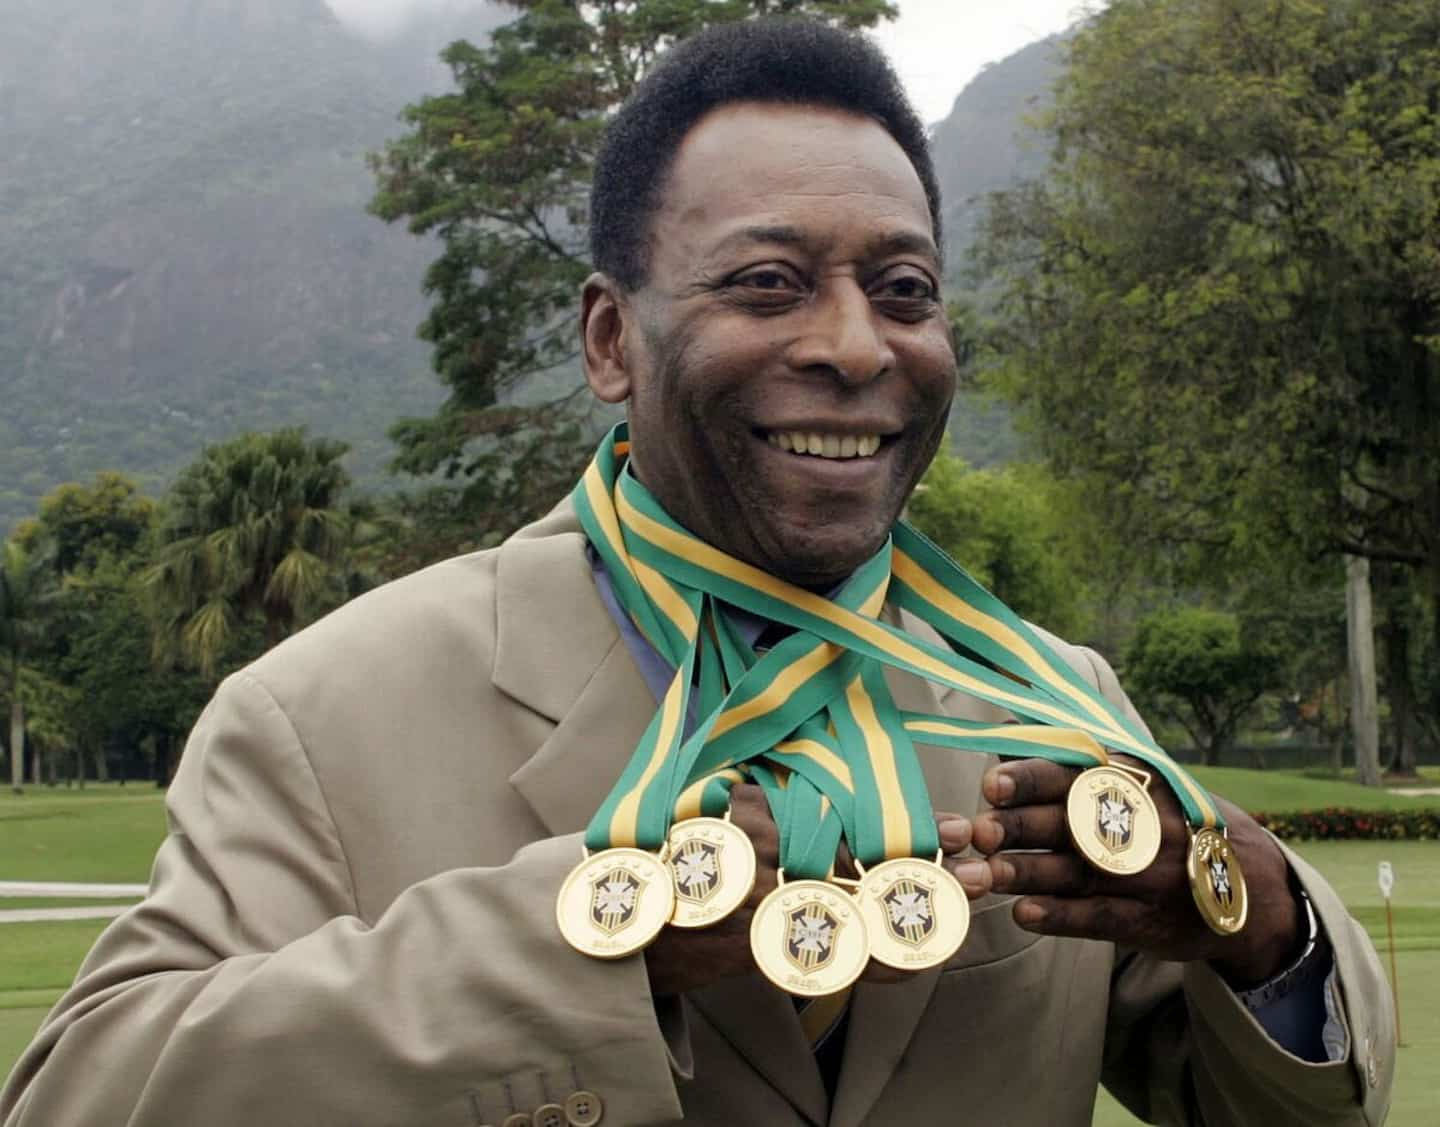 Death of Pelé: a burning chapel will take place next Monday